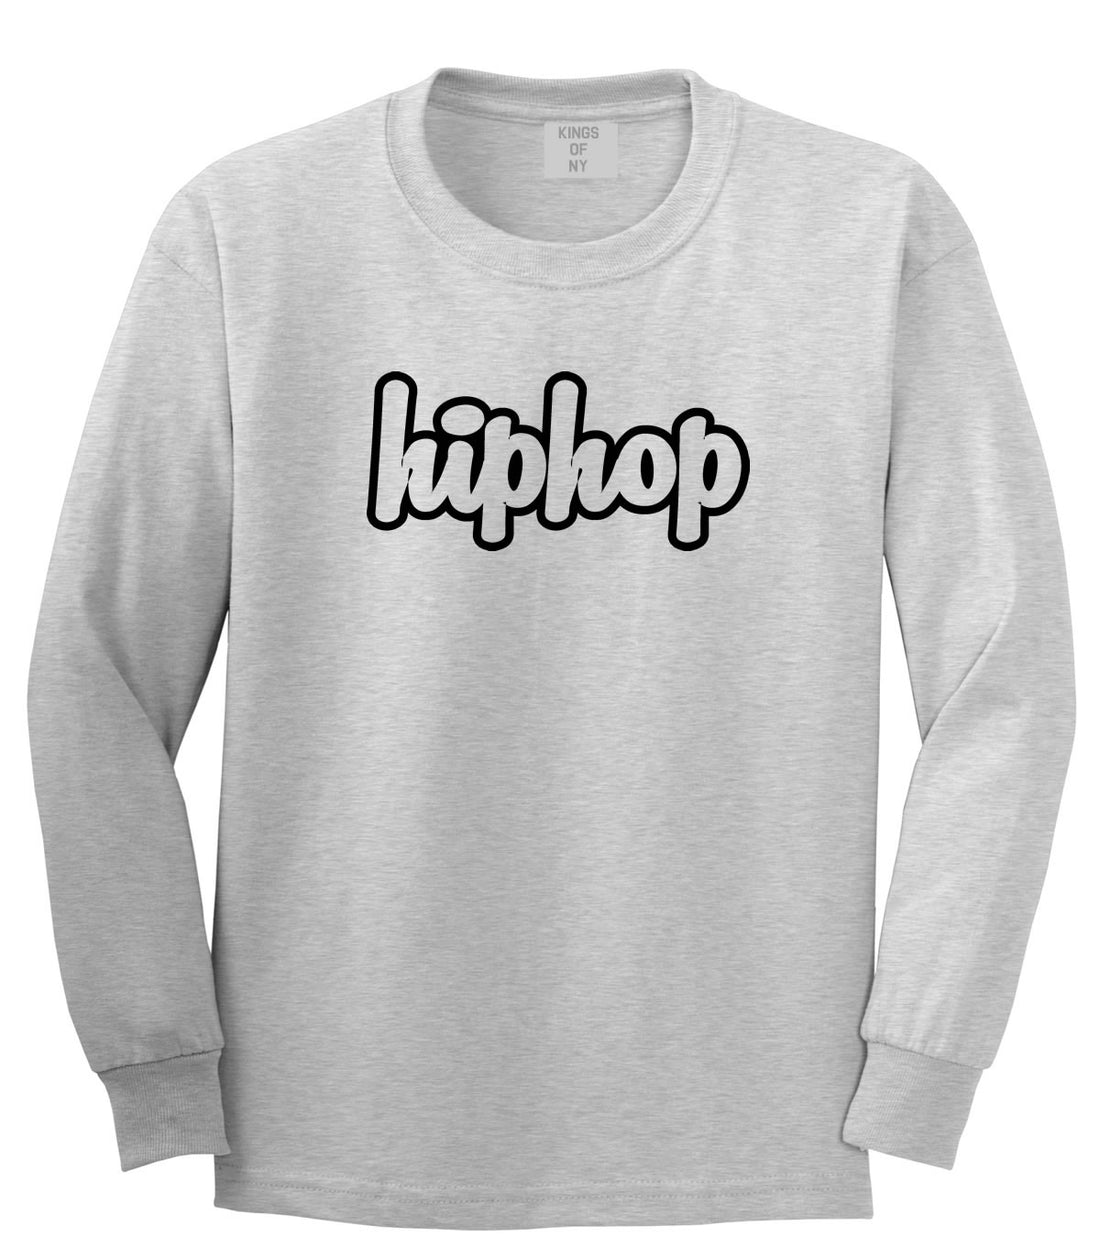 Hiphop Outline Old School Long Sleeve T-Shirt in Grey By Kings Of NY